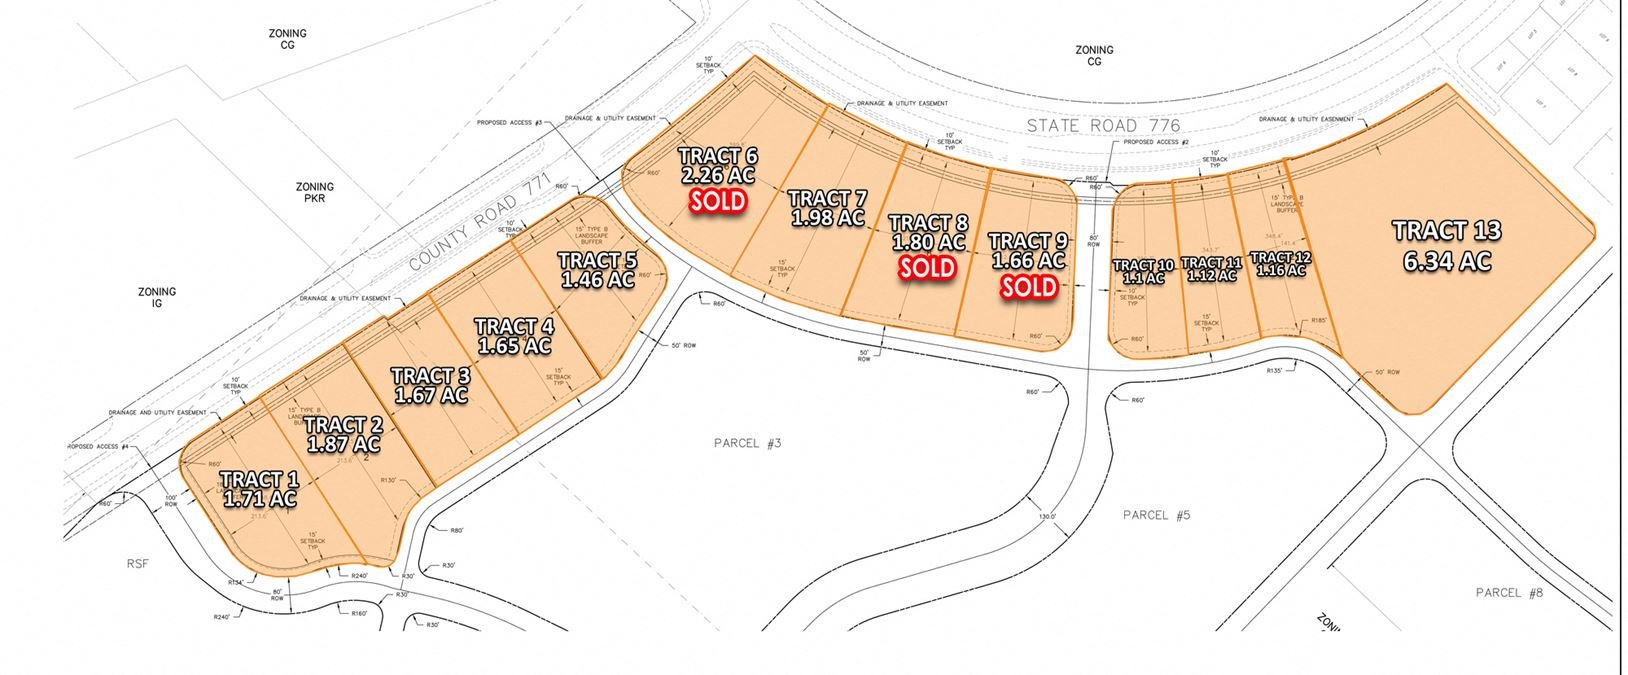 West Charlotte County Retail Parcel - Tract 12